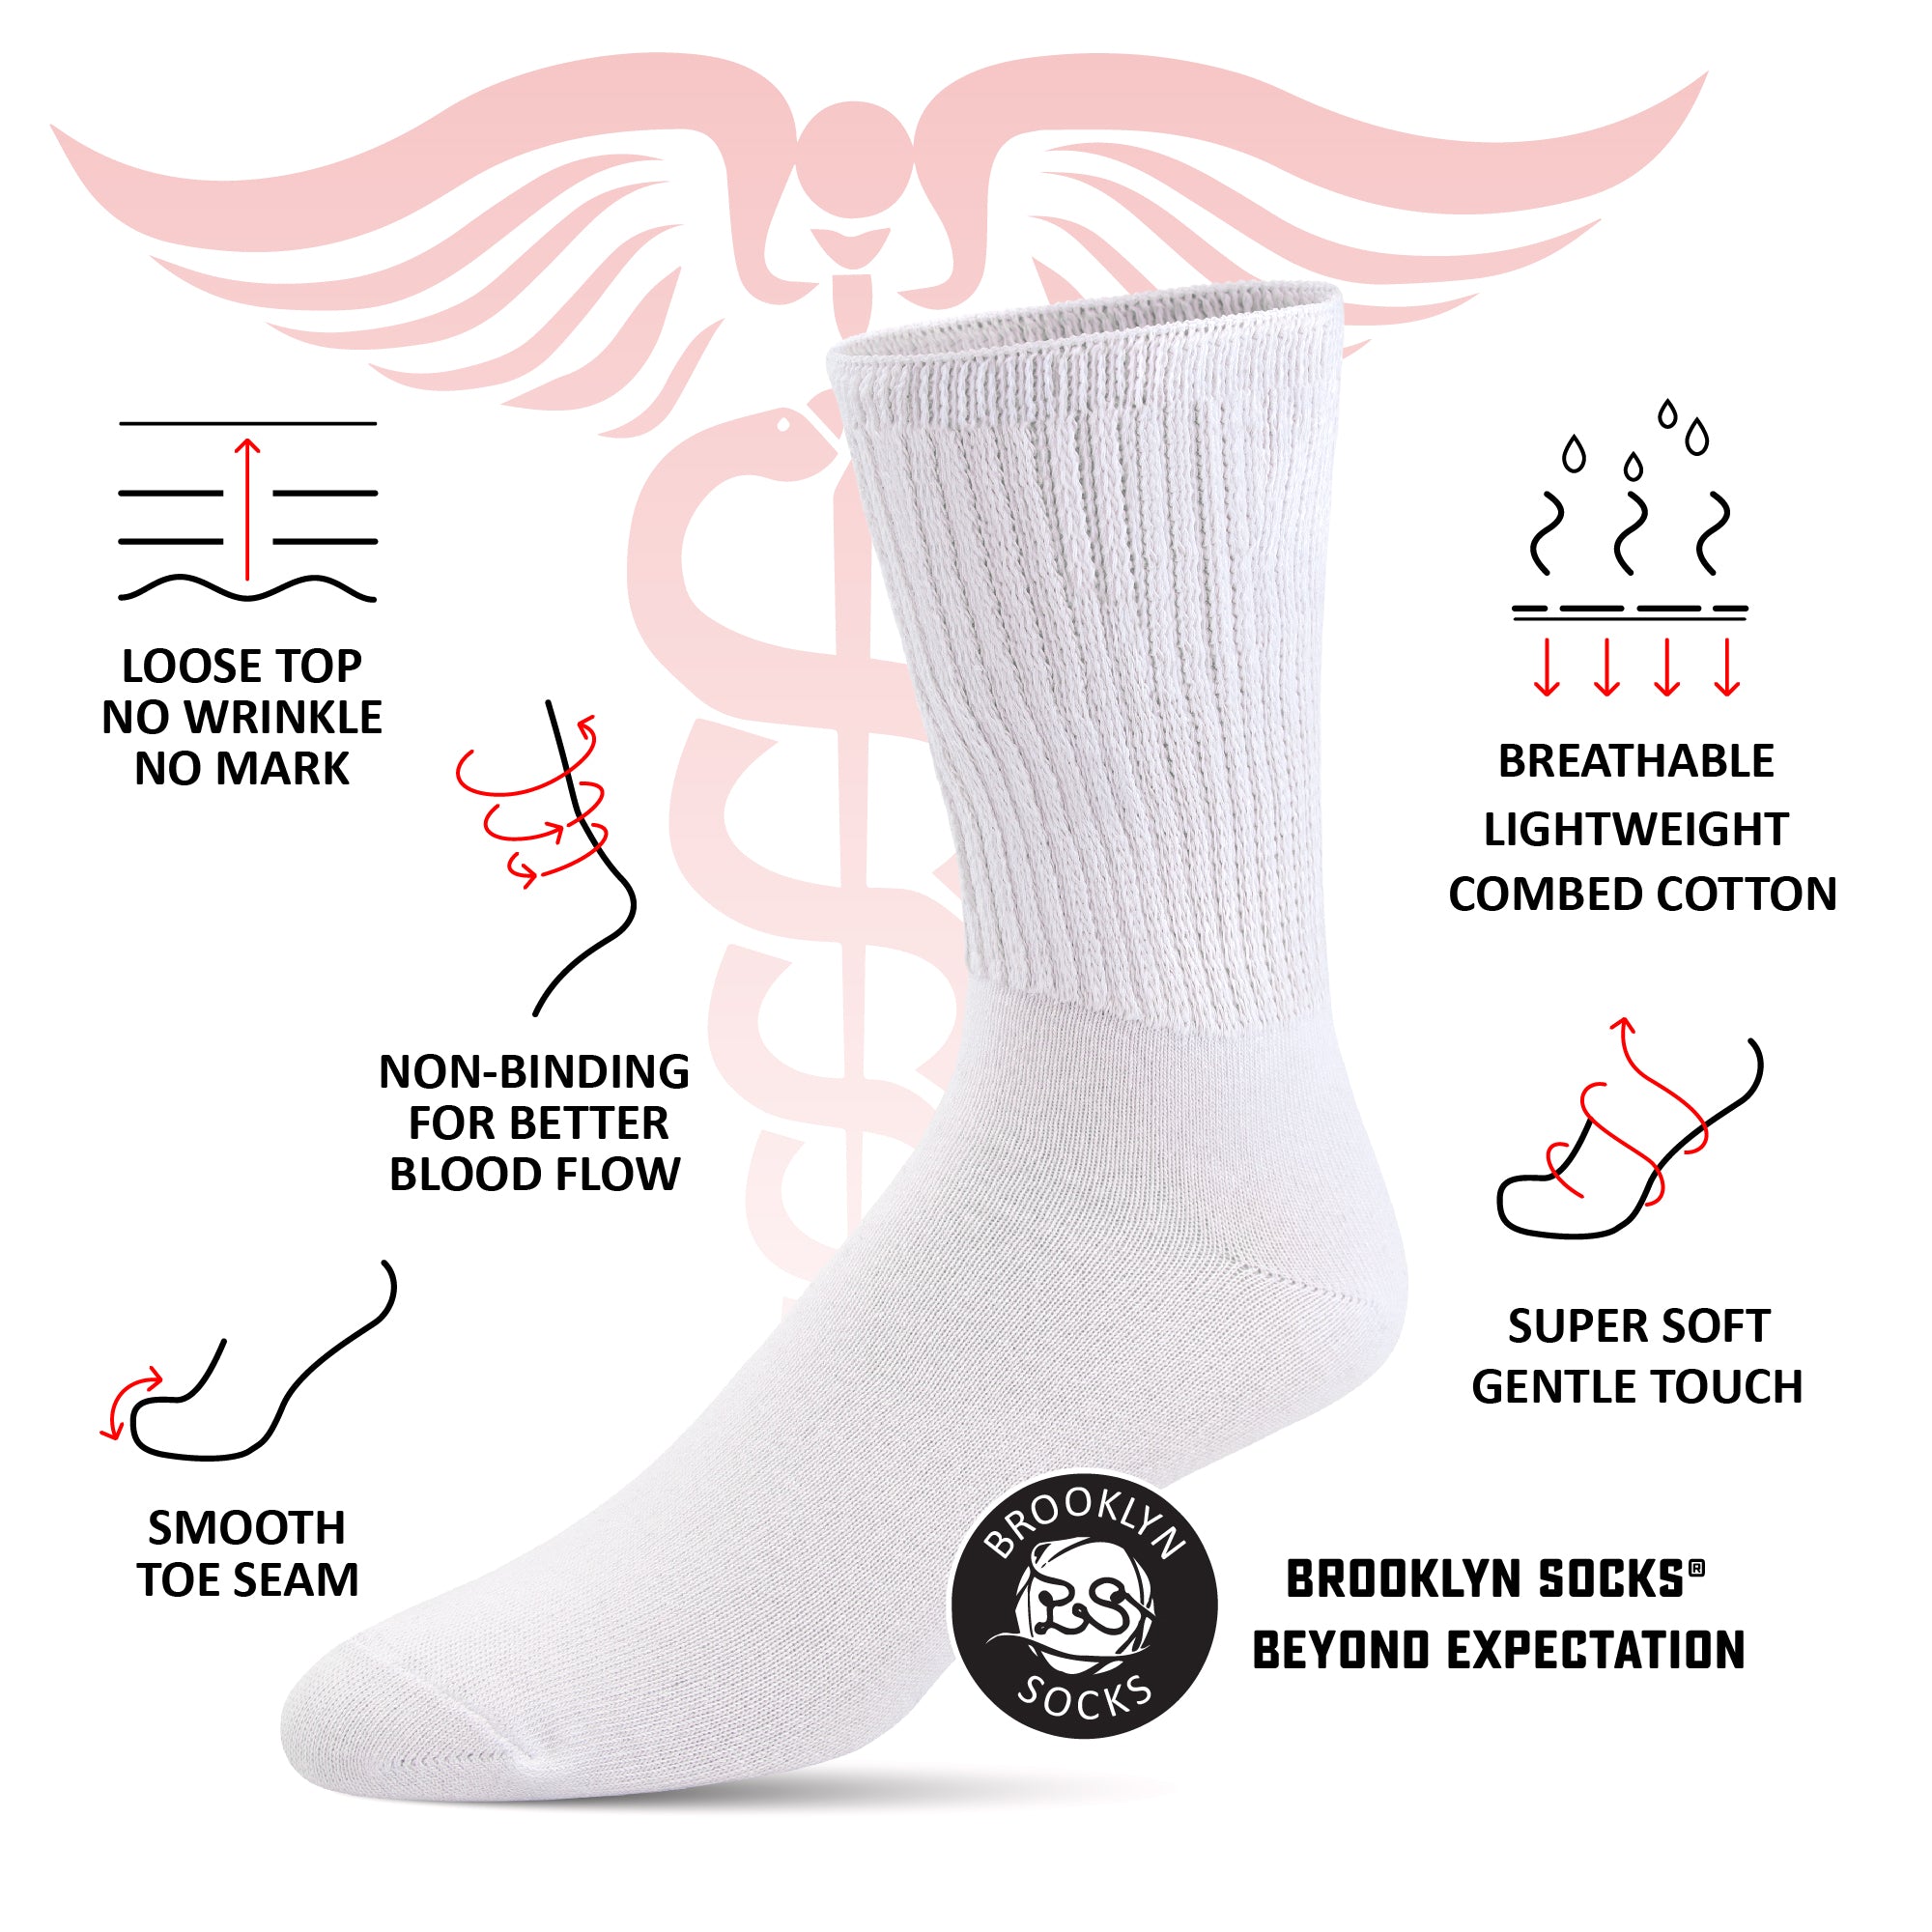 Thin Combed Cotton Diabetic Socks, Loose, Wide, Non-Binding Low-Crew Socks (Fits Shoe Size 7-11 )